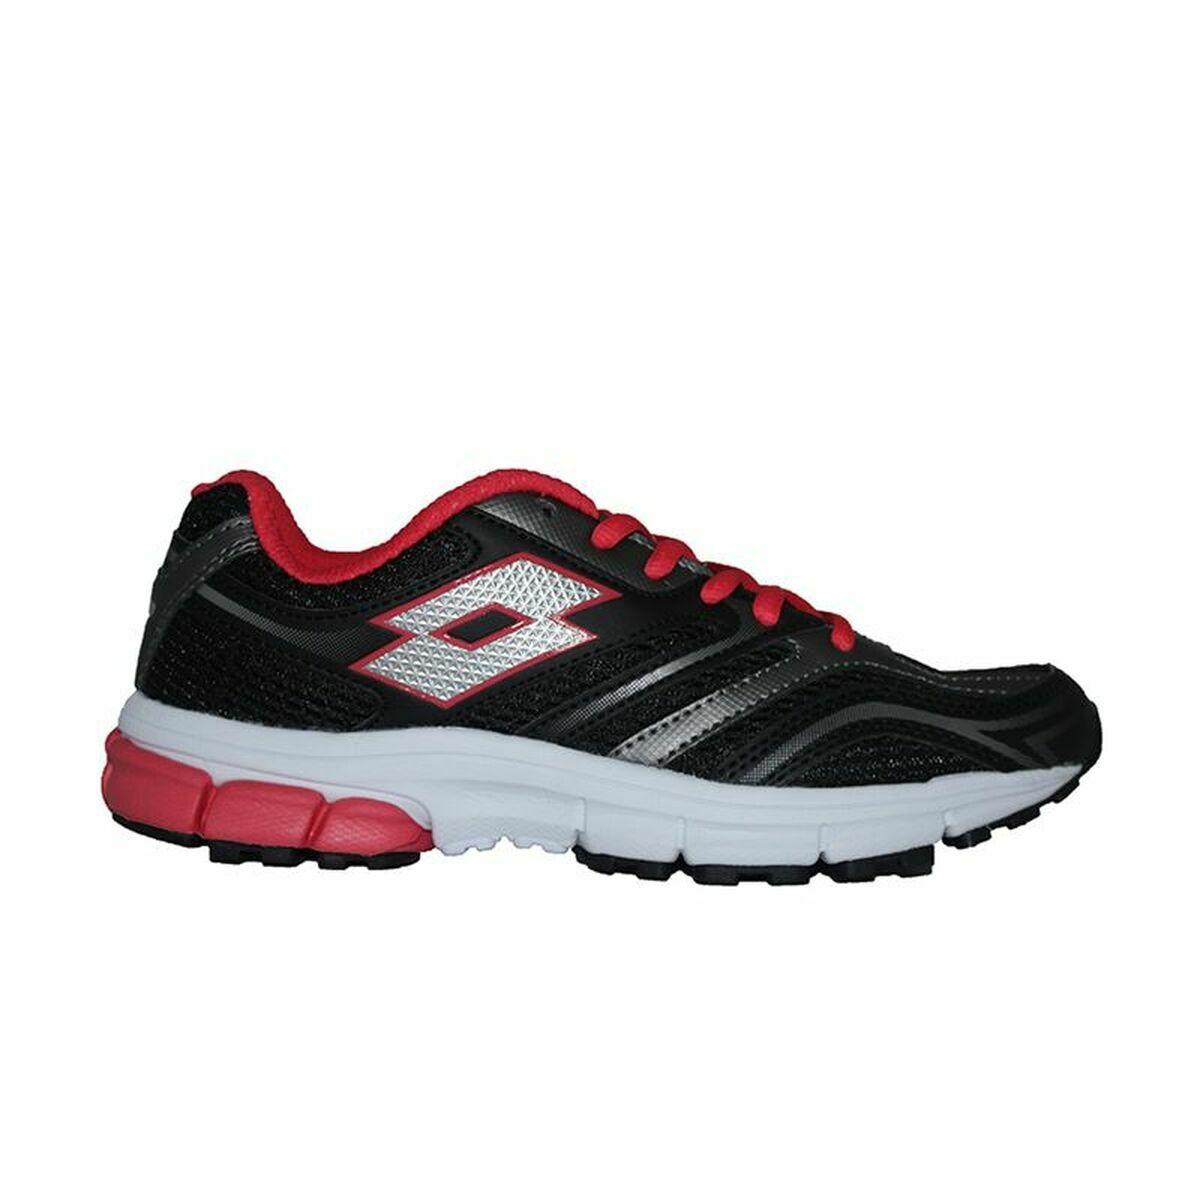 Lotto Leggenda Running Shoes For Adults Zenith Lady Black | Lyst